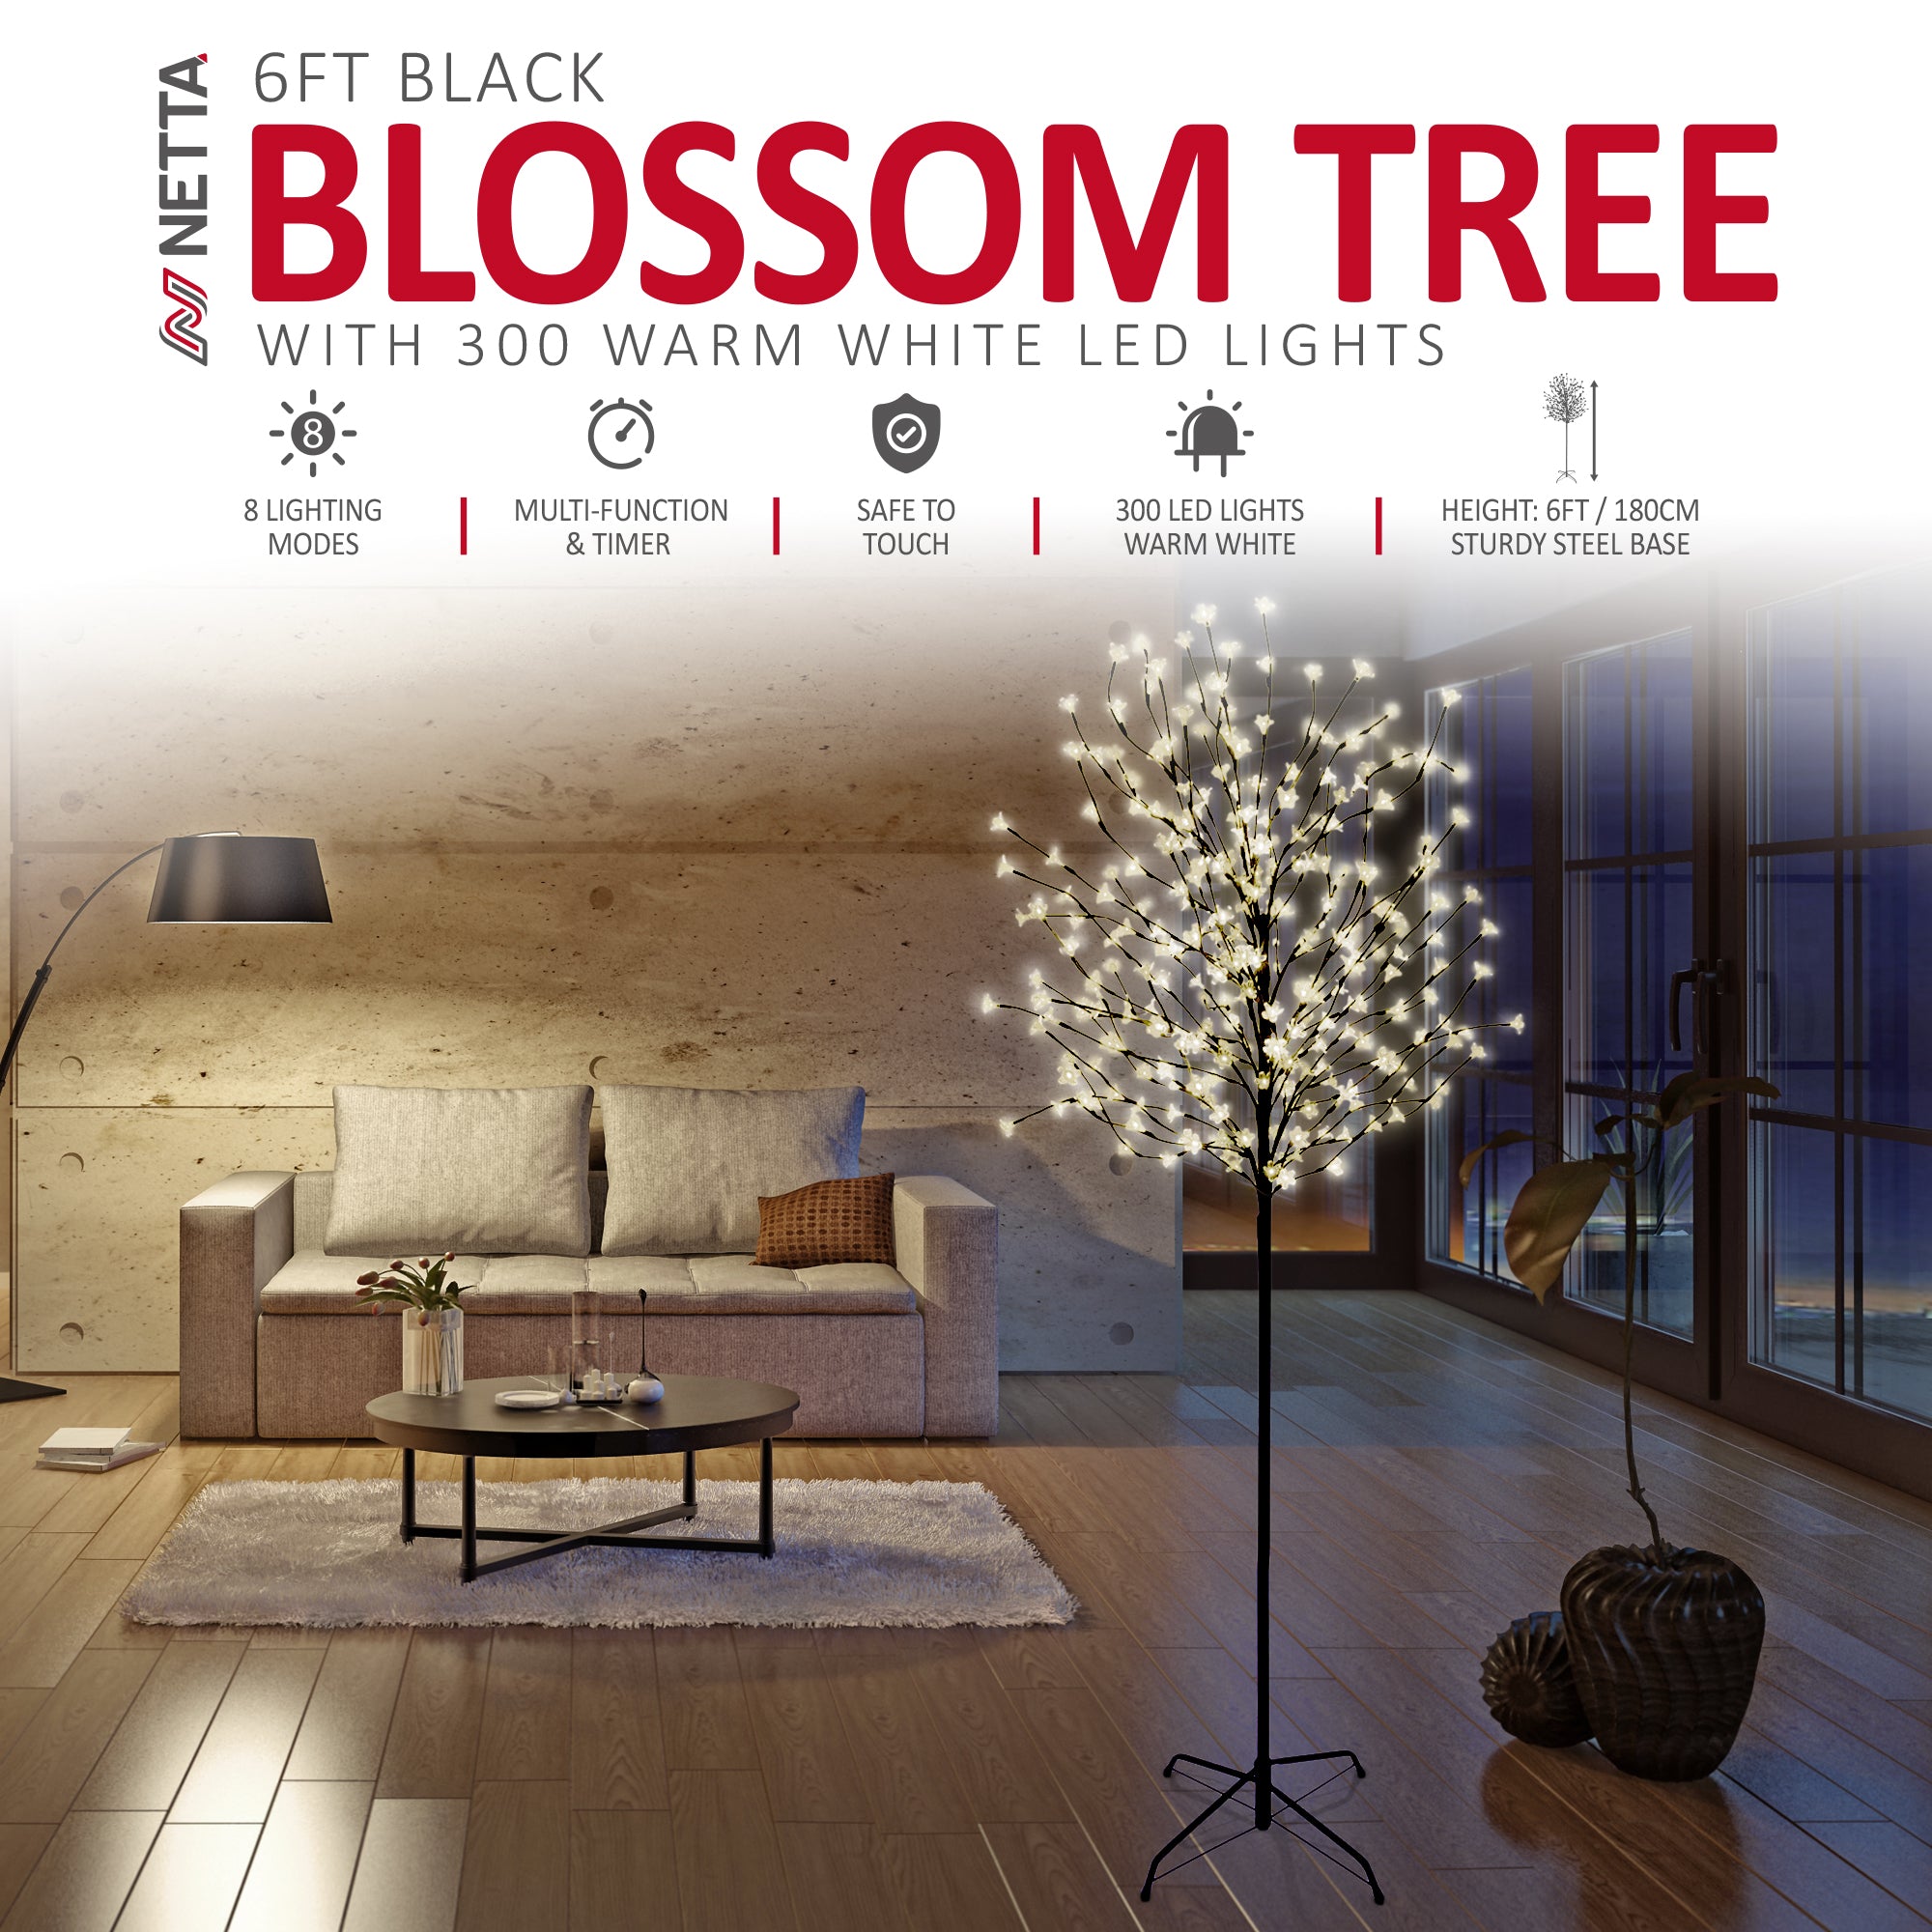 NETTA 6FT LED Cherry Blossom Tree, Pre-Lit 300 Lights, Auto-Off Timer and 8 Lighting Modes, 3M Power Cable, Suitable for Indoor and Outdoor Use - Warm White